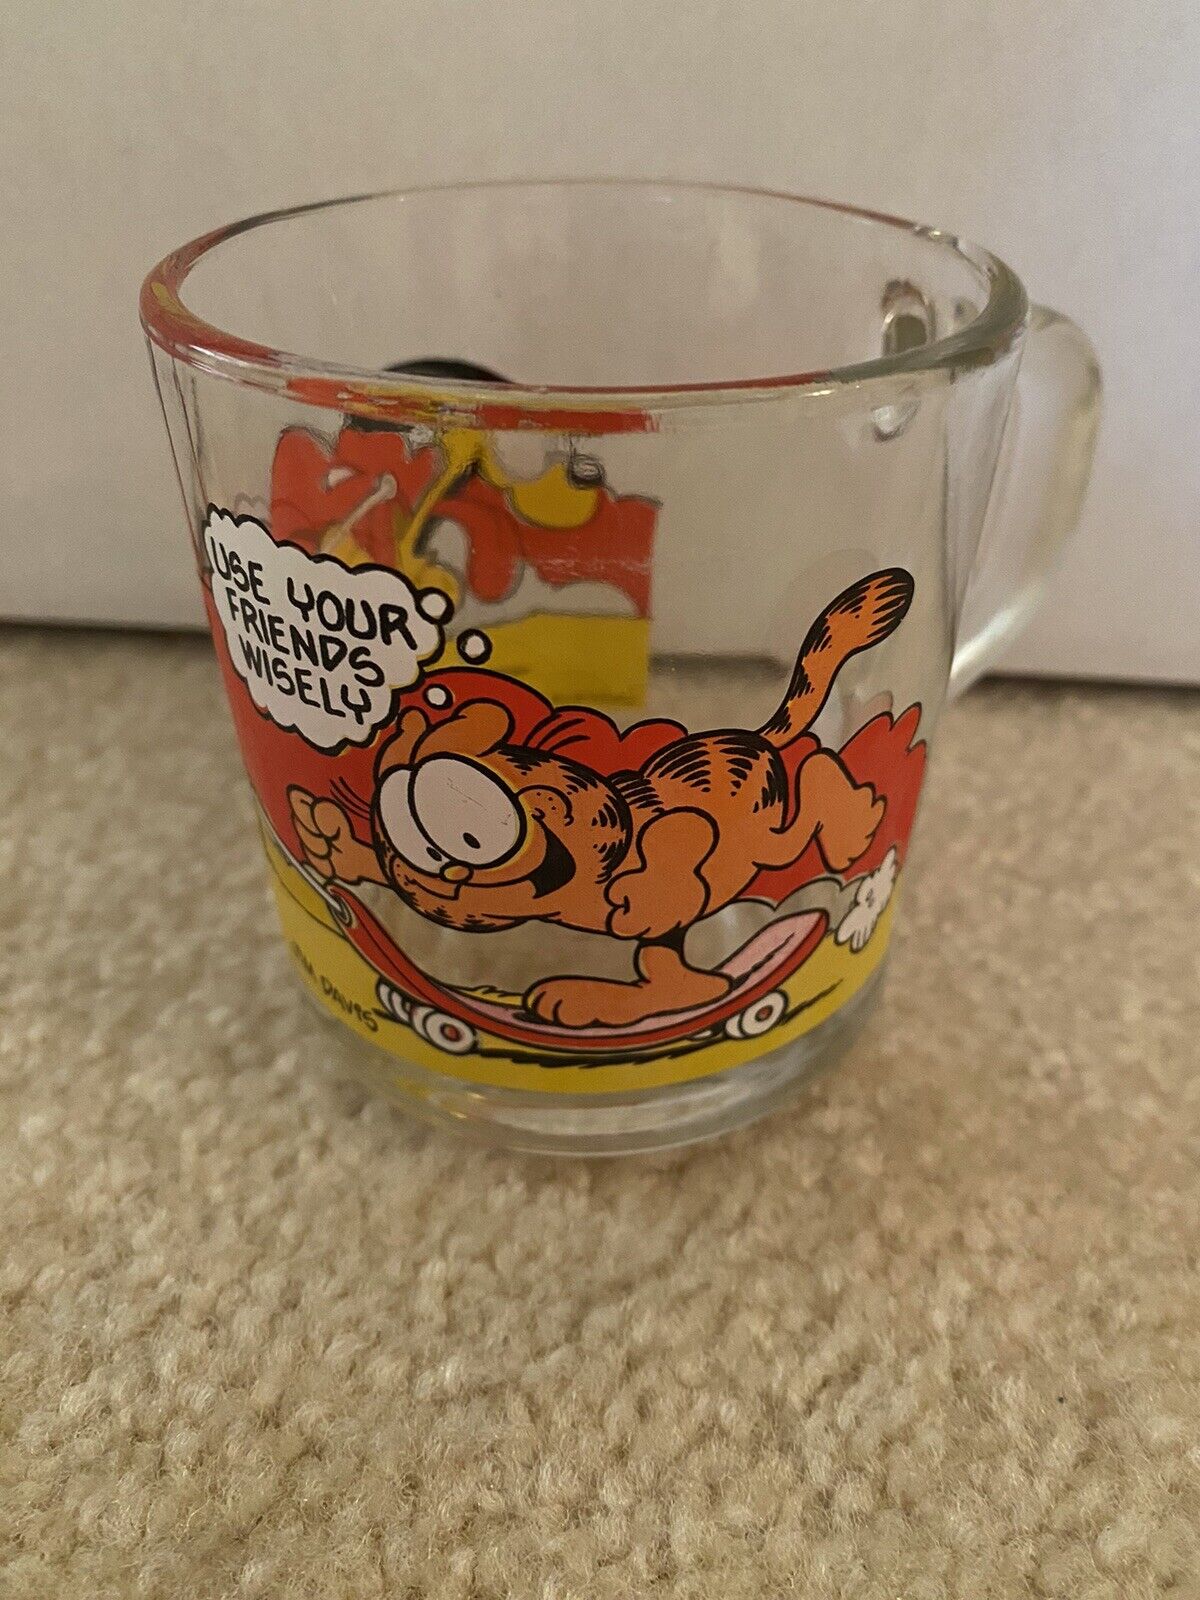 Vintage 1978 McDonald’s GARFIELD MUG ‘Use Your Friends Wisely’, Clear with Decal